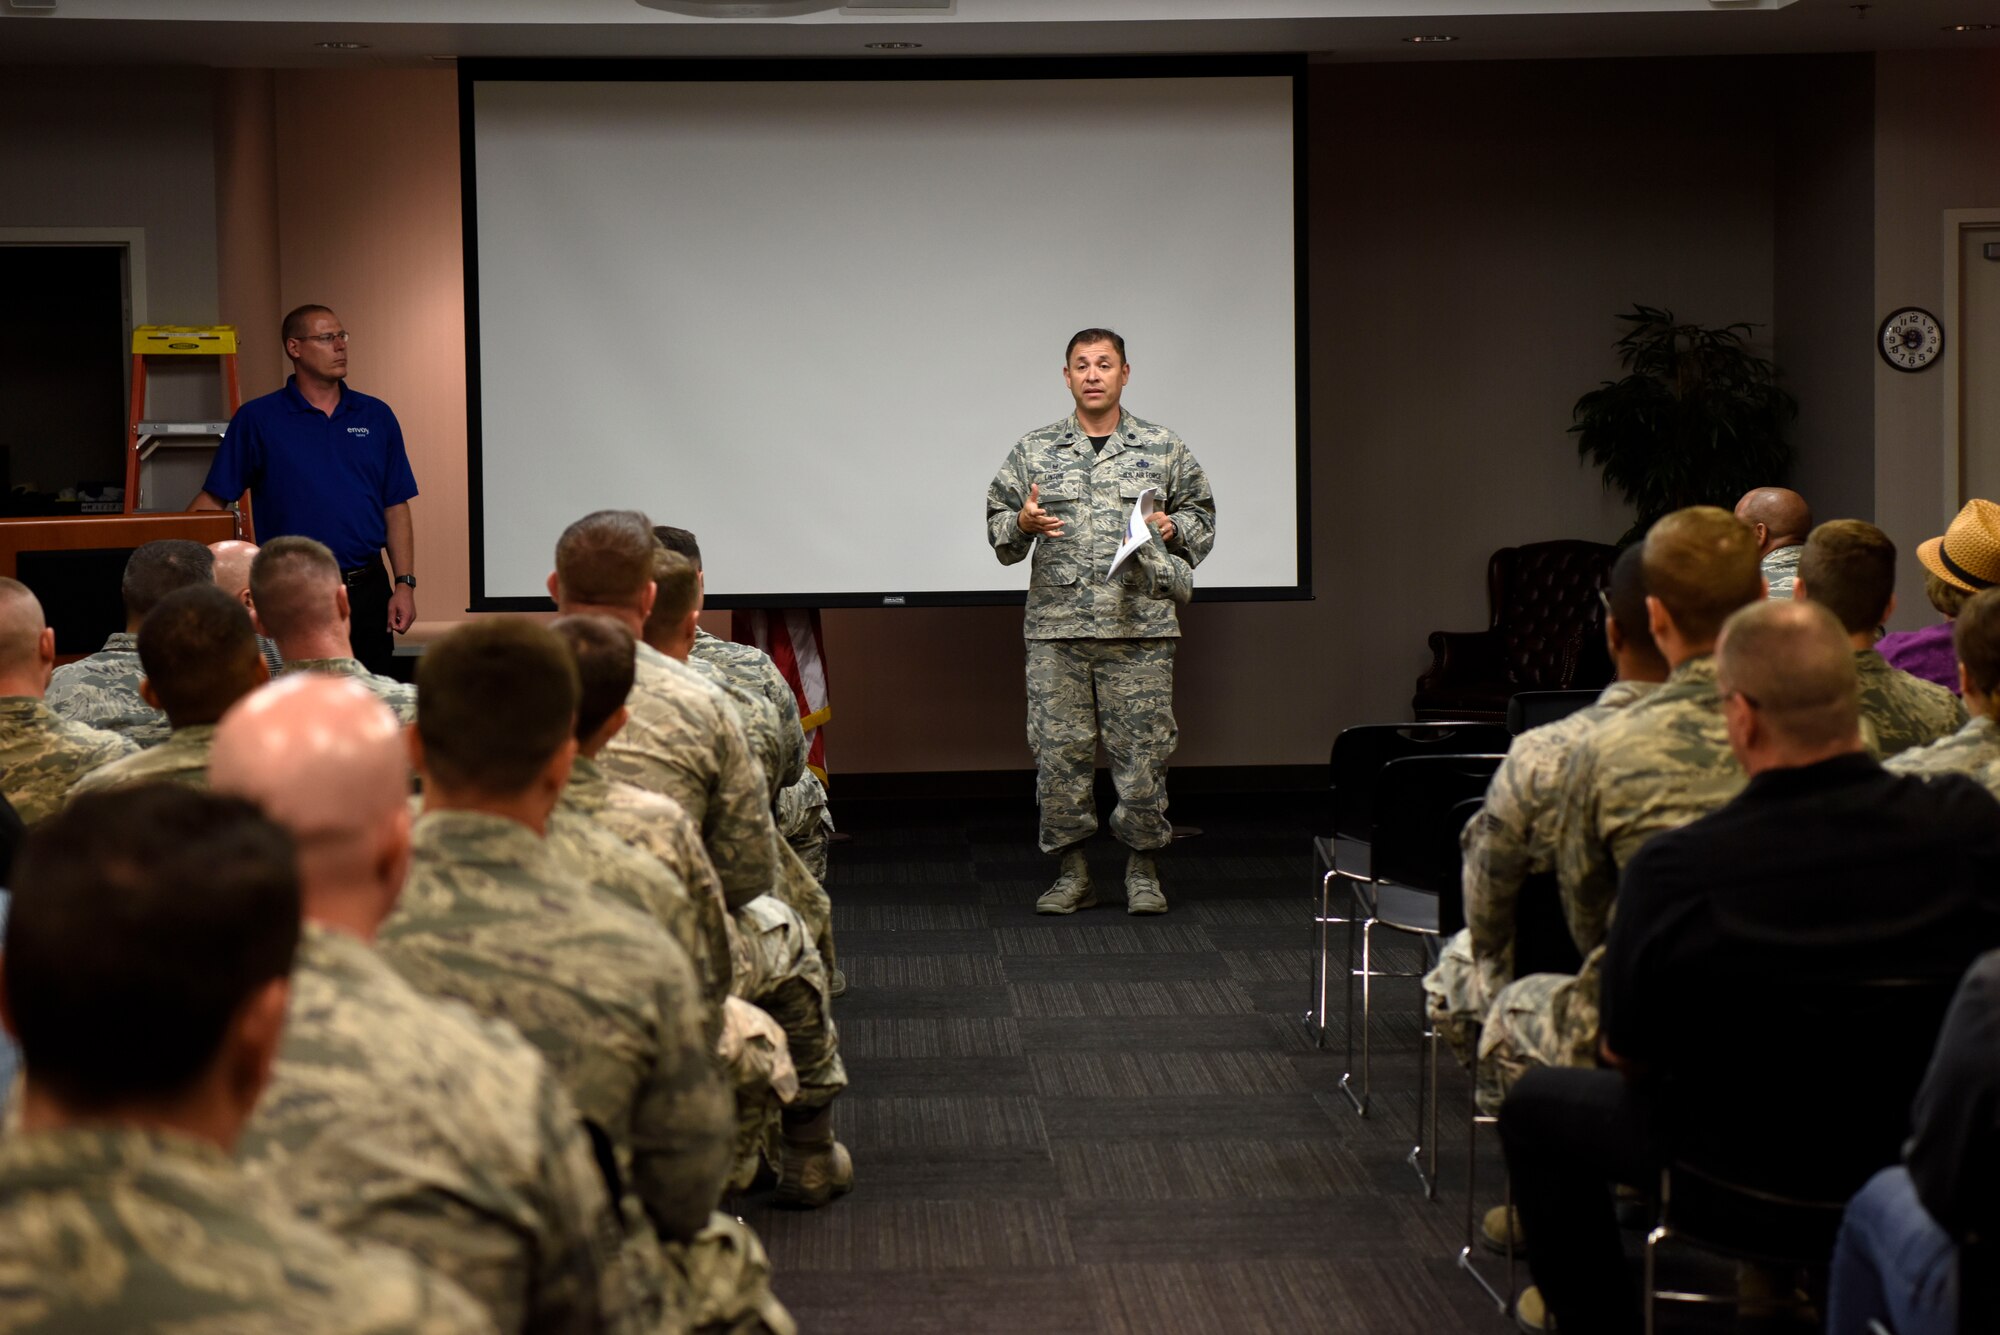 Lt. Col. David Linton, 436th Aerial Port Squadron commander, briefs his Airmen during an operational safety review day May 18, 2018, at Dover Air Force Base, Del. Commander-led forums were conducted to gather feedback from Airmen who execute the Air Force's flying operations and challenge Airmen to identify issues that may cause a future mishap. (U.S. Air Force photo by Airman 1st Class Zoe M. Wockenfuss)